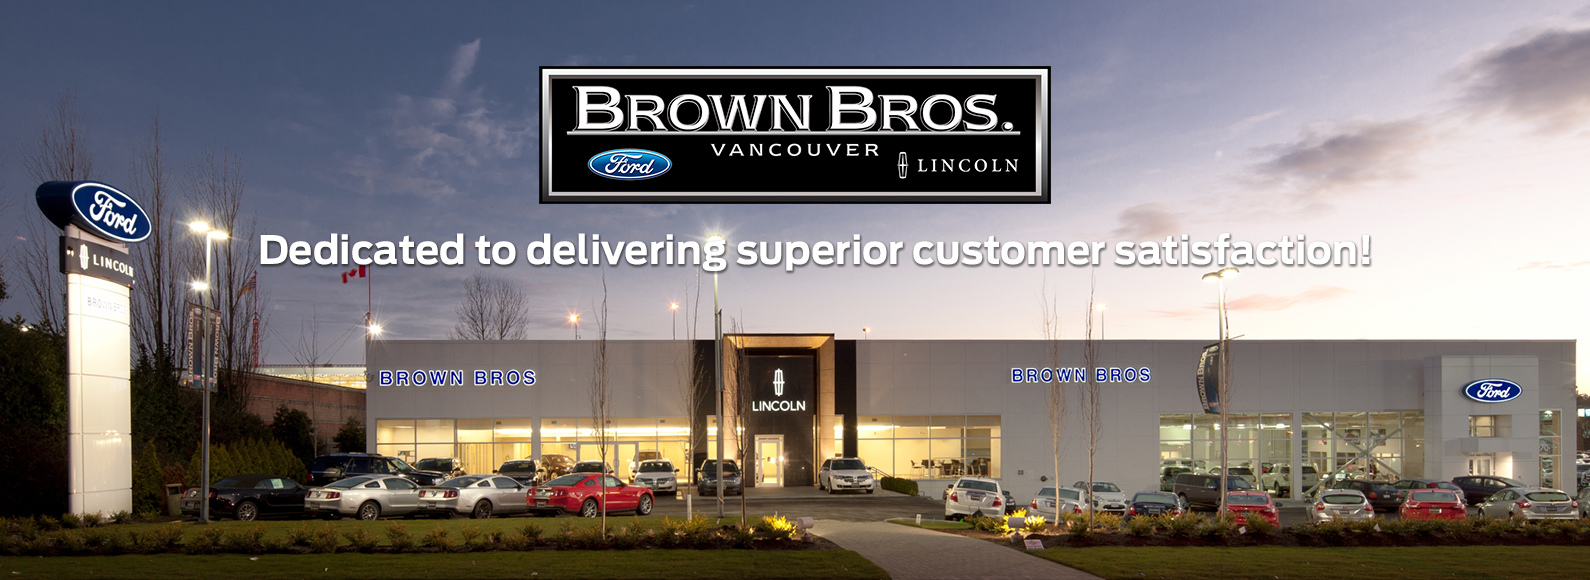 Brown brothers ford in vancouver